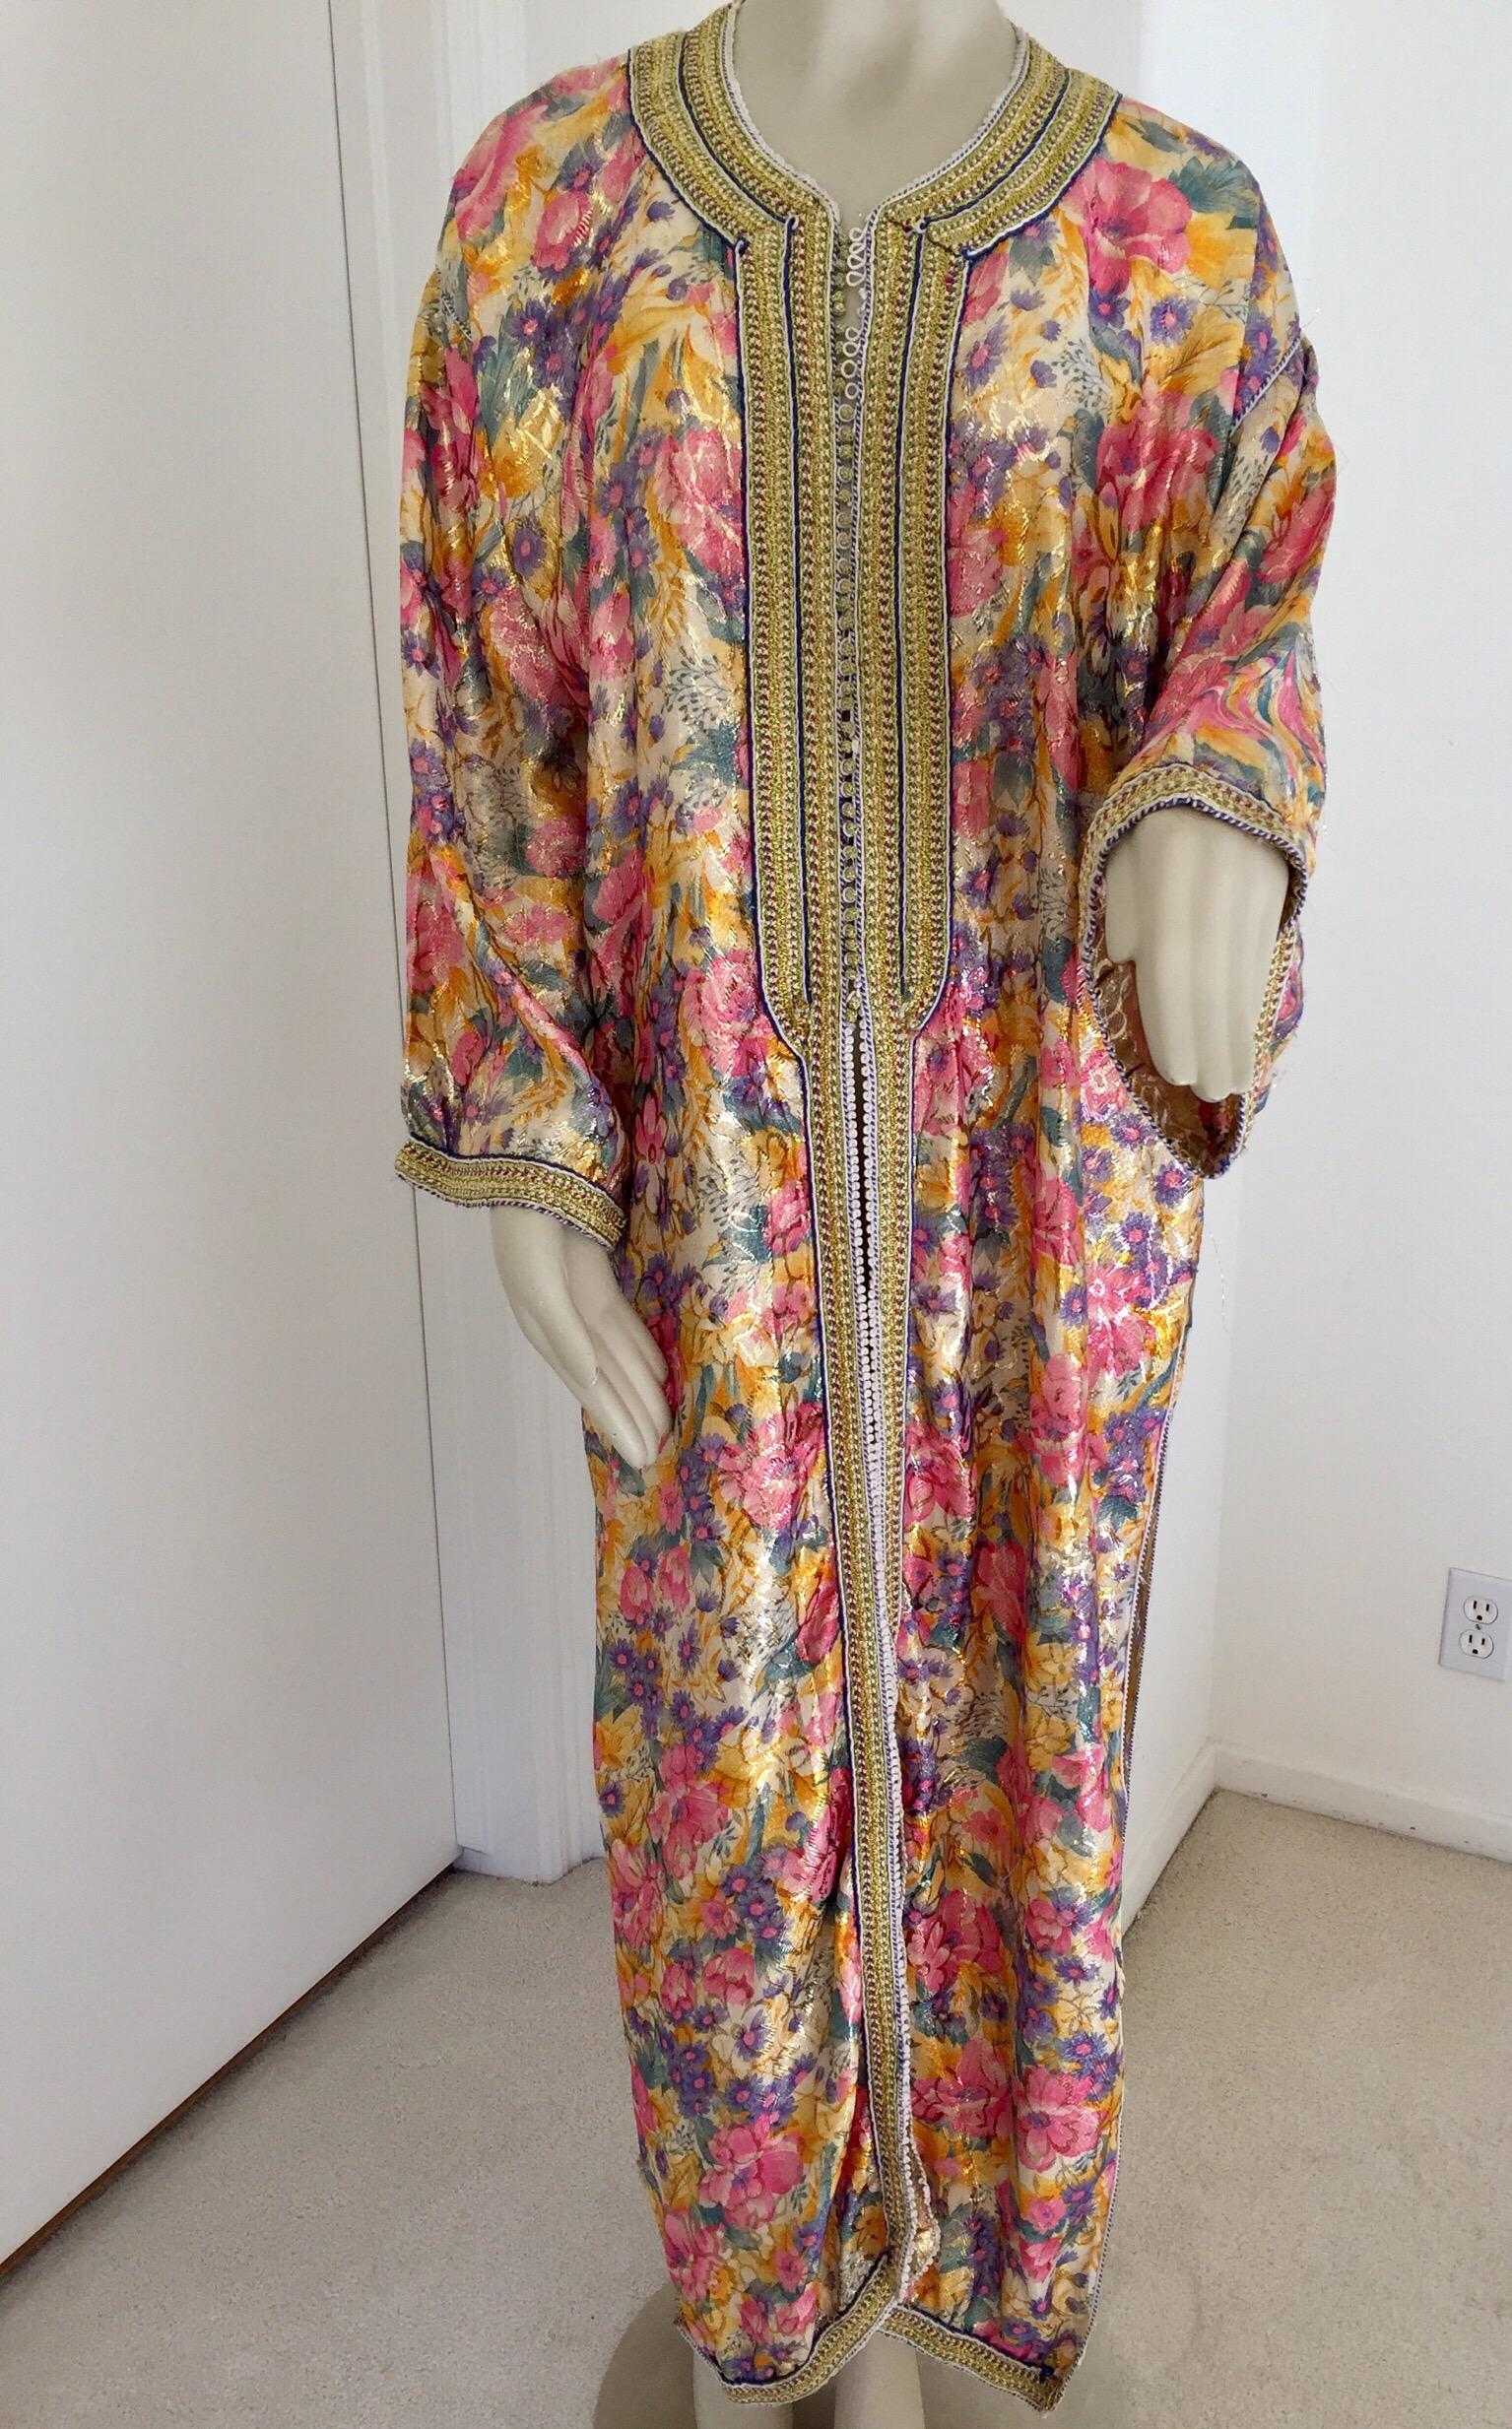 Elegant Moroccan caftan metallic silk floral brocade,
circa 1970s.
This light summery caftan is crafted in Morocco and tailored for a relaxed fit, features a traditional neckline, embellished sleeves and vented sides.
This long maxi dress kaftan